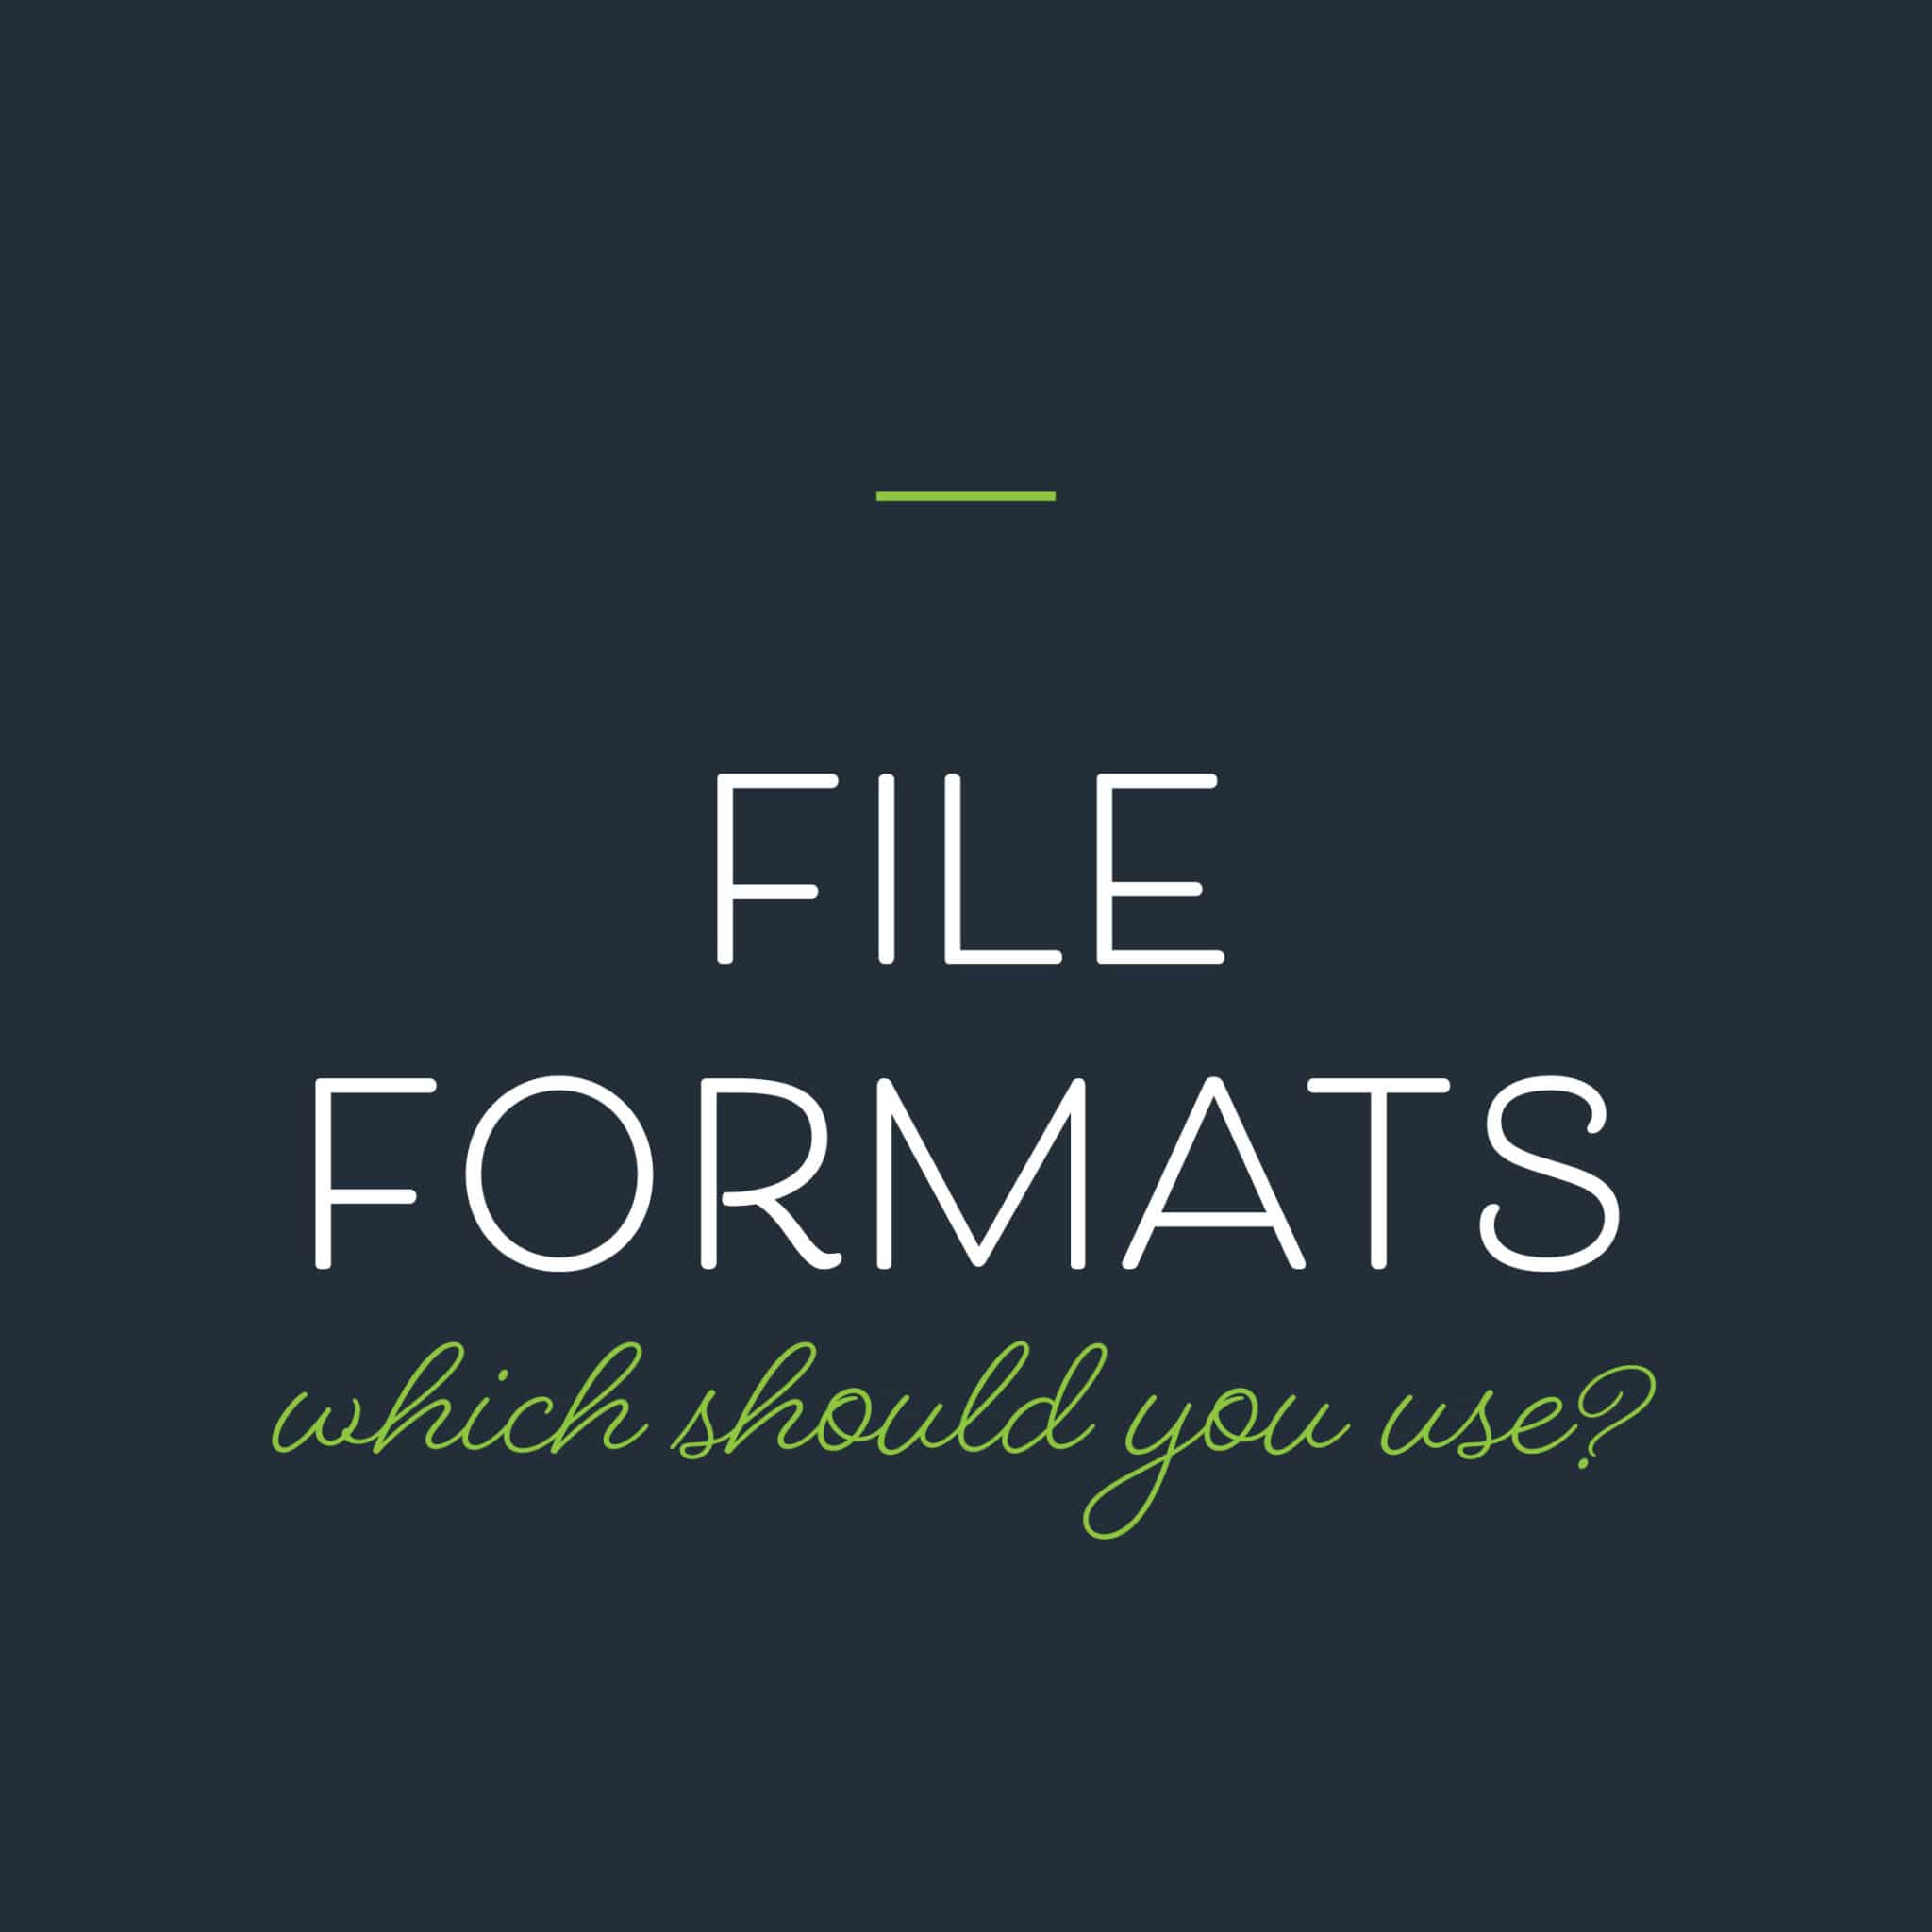 Which File Format?